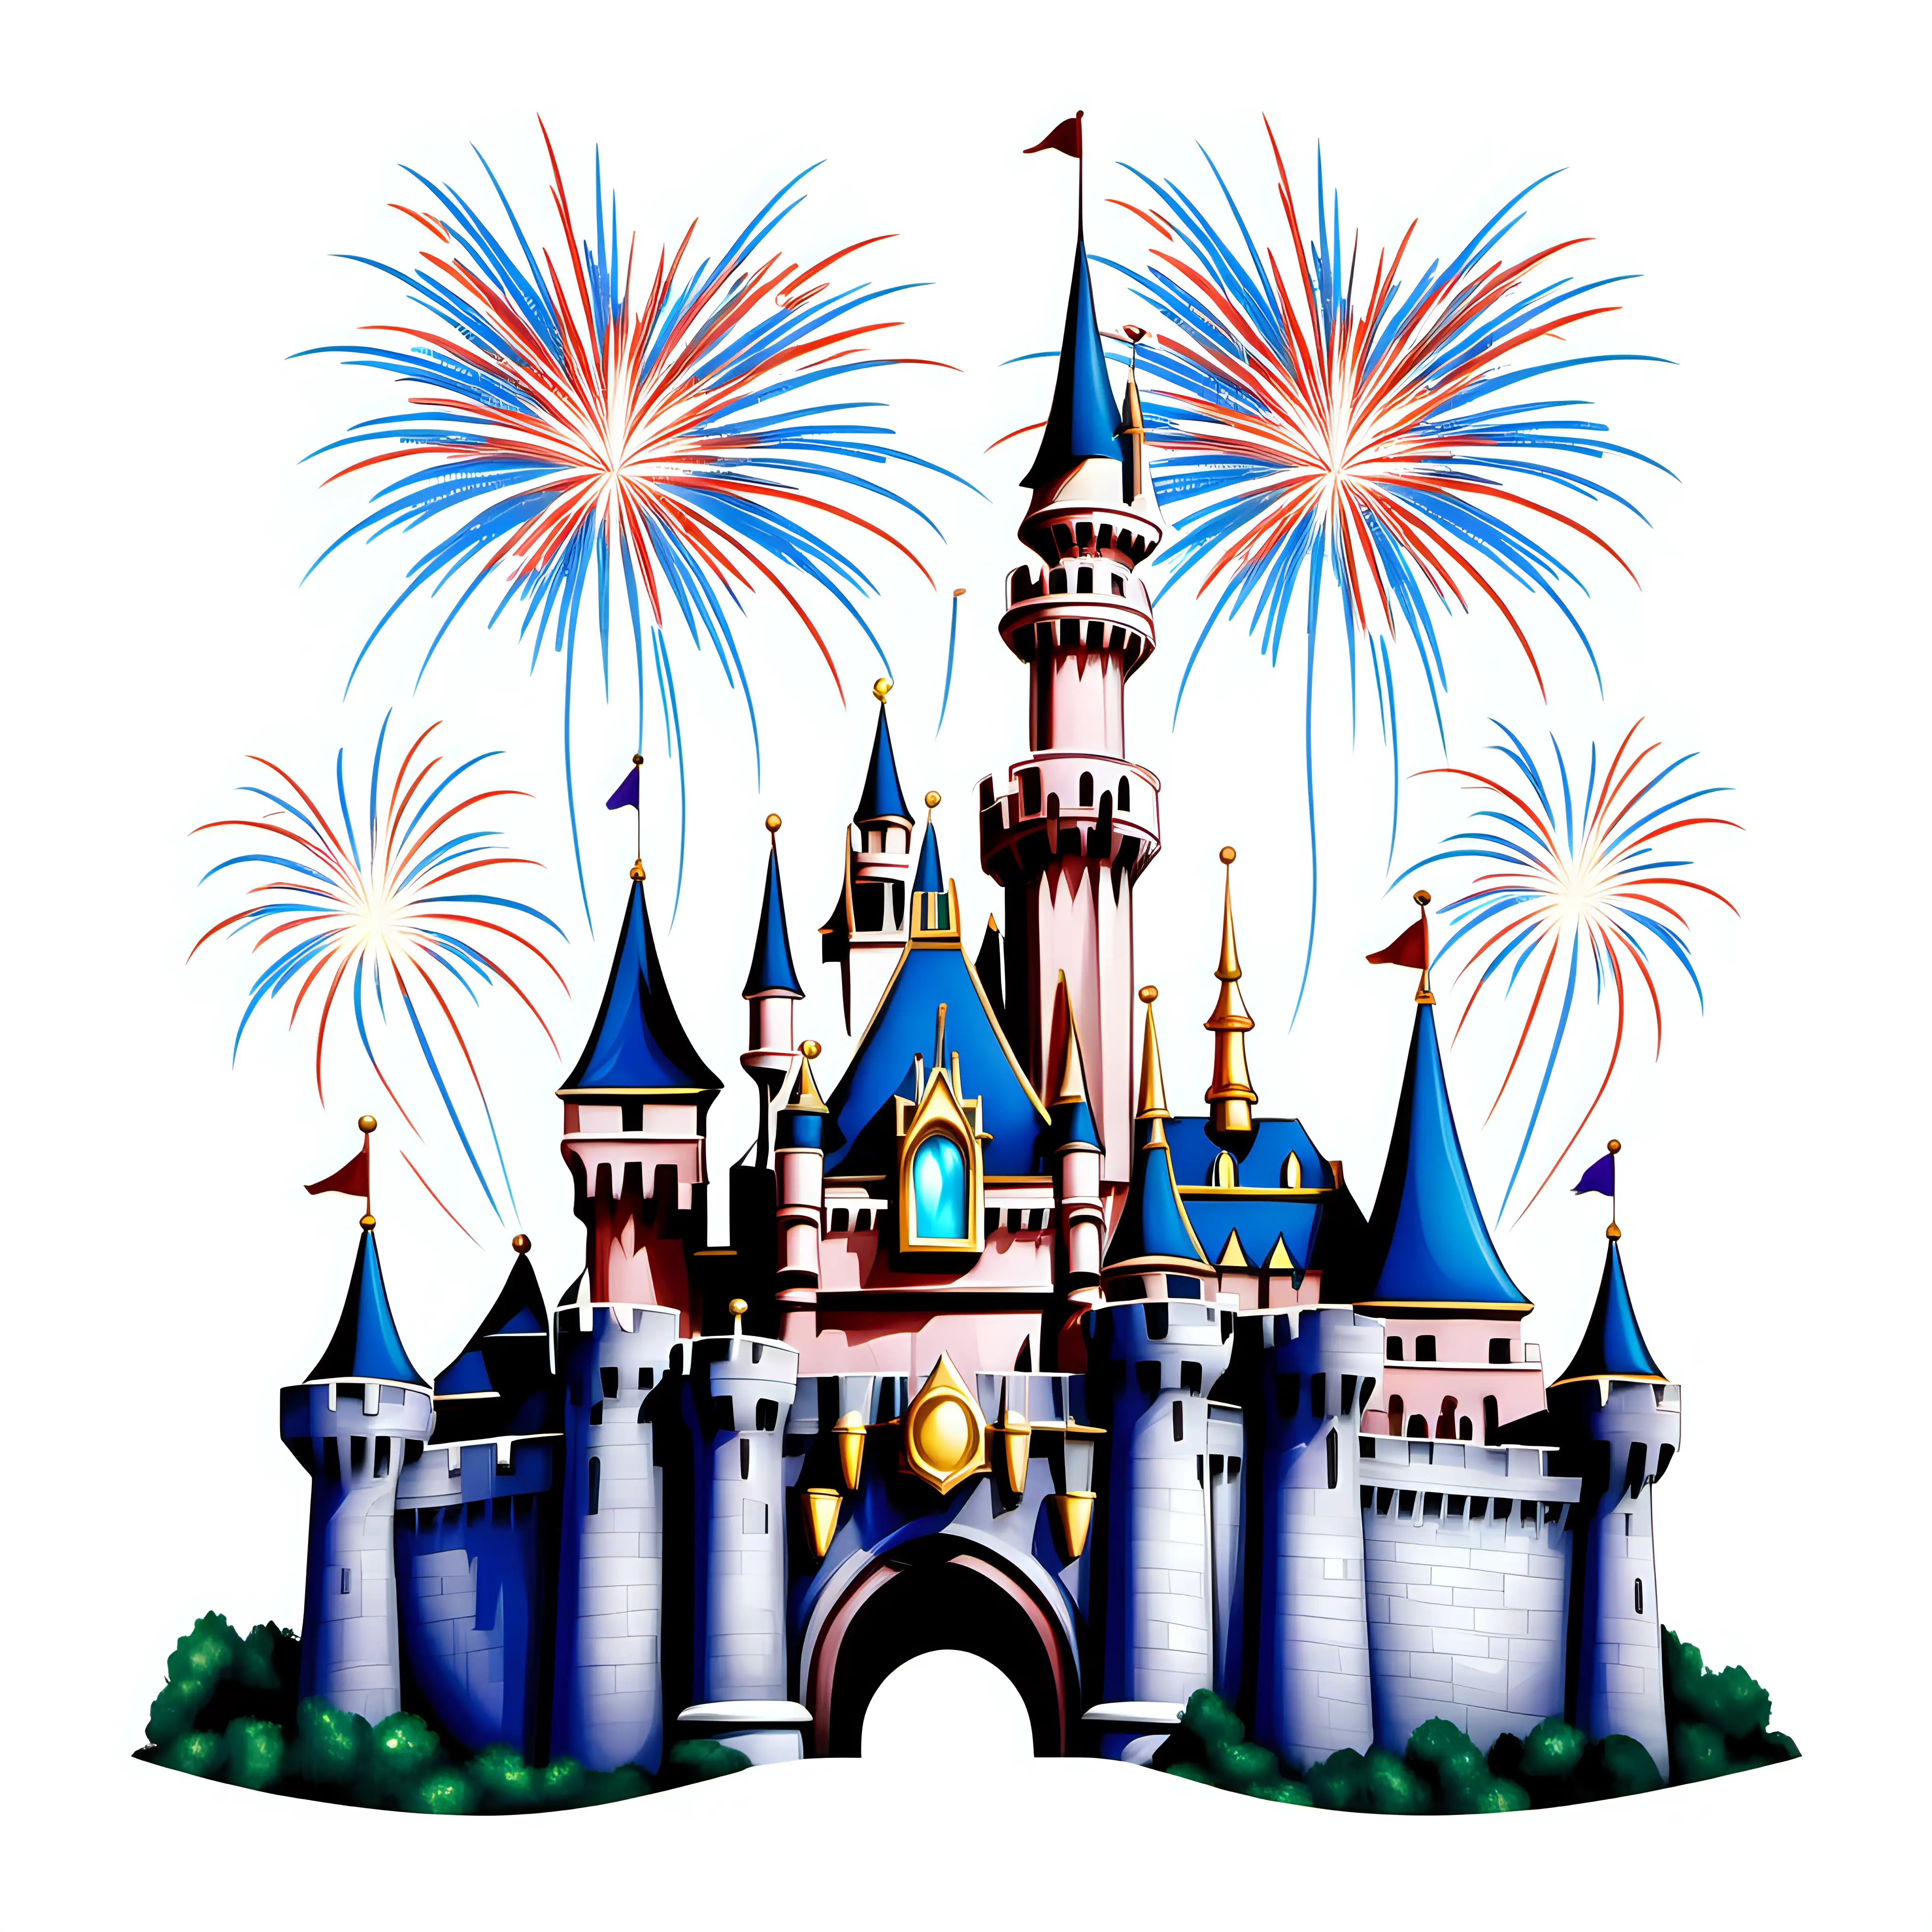 I need an illustration created on a white background. Disneyland. 2024.  Sleeping Beauty castle, mickey, large fireworks over the castle, edges must be sharp or fade to white